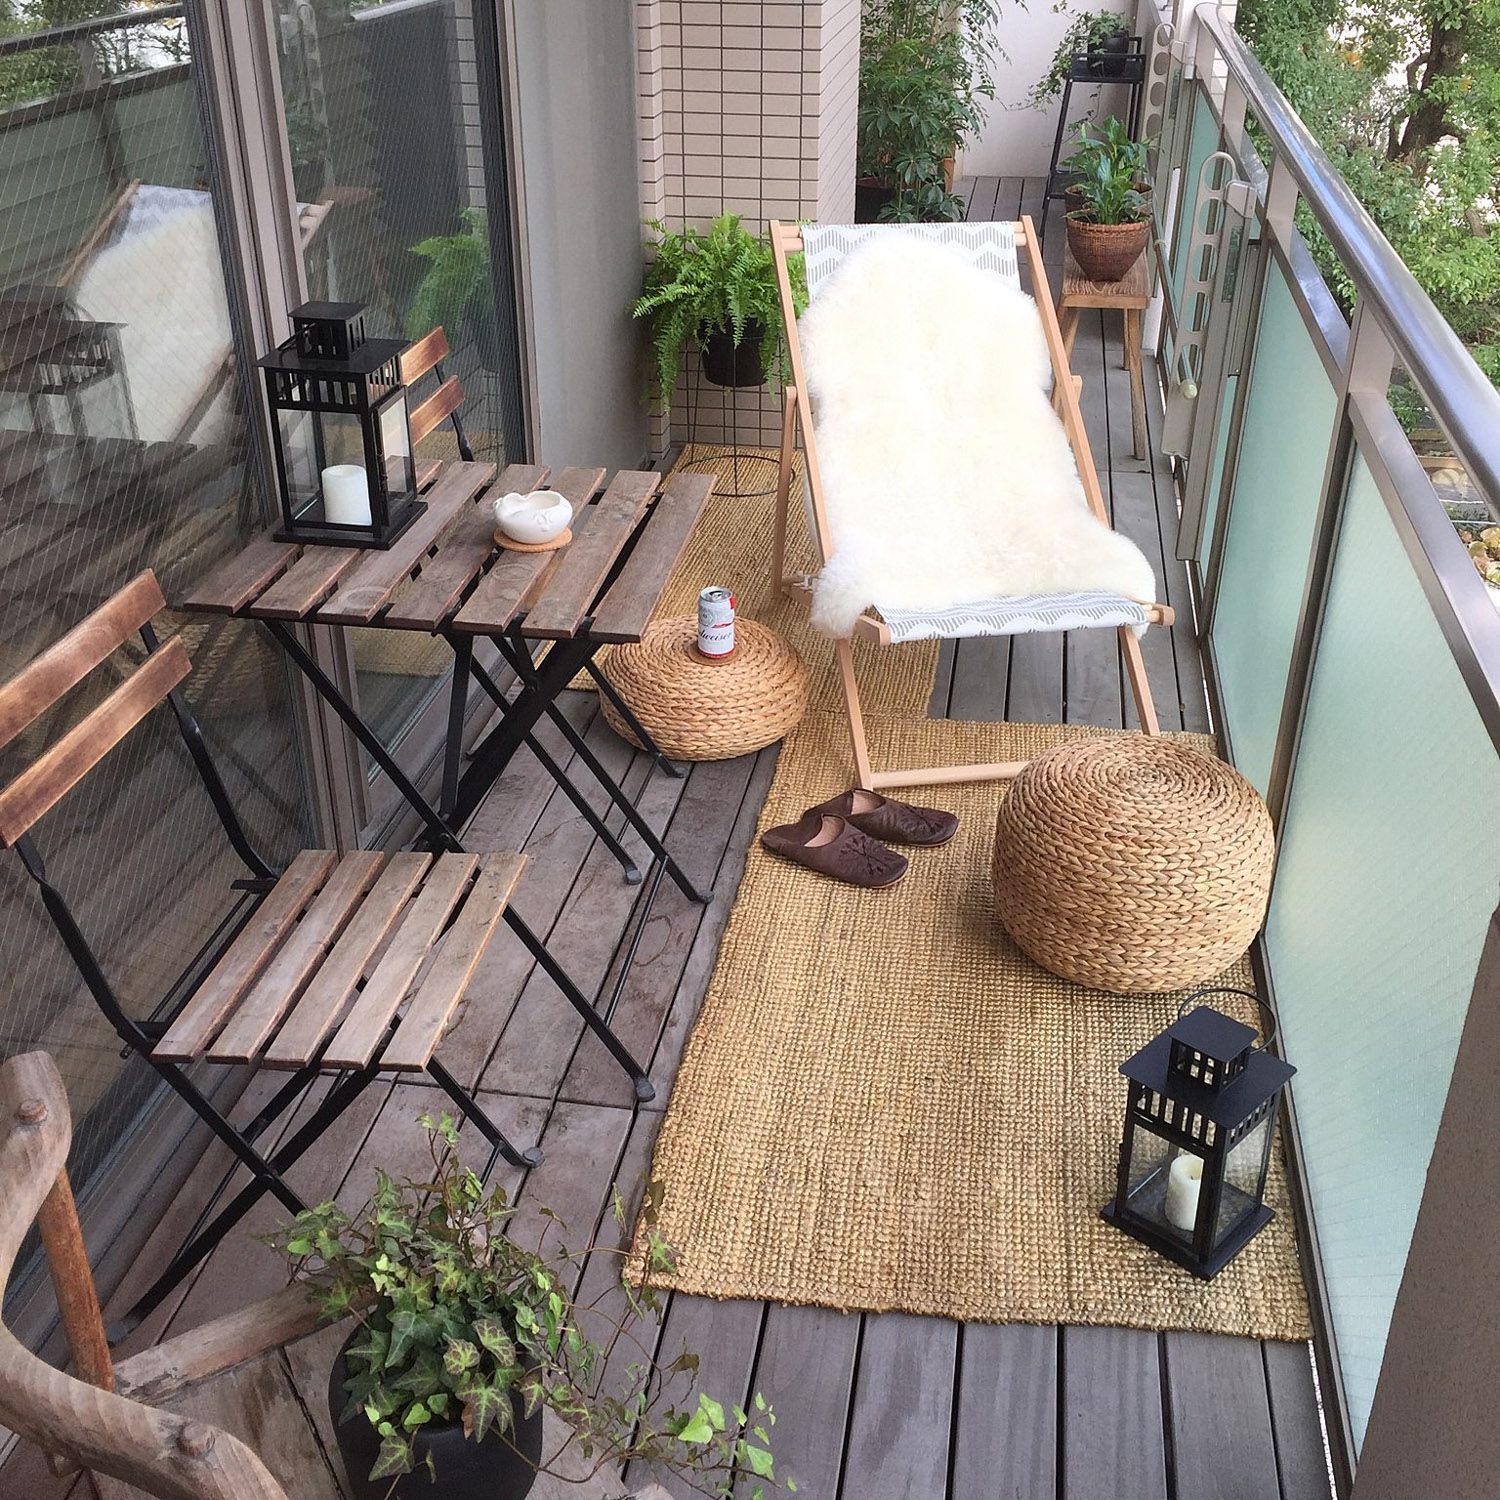 Inspiration for Small Apartment Balconies in the City -   15 plants Balcony house ideas